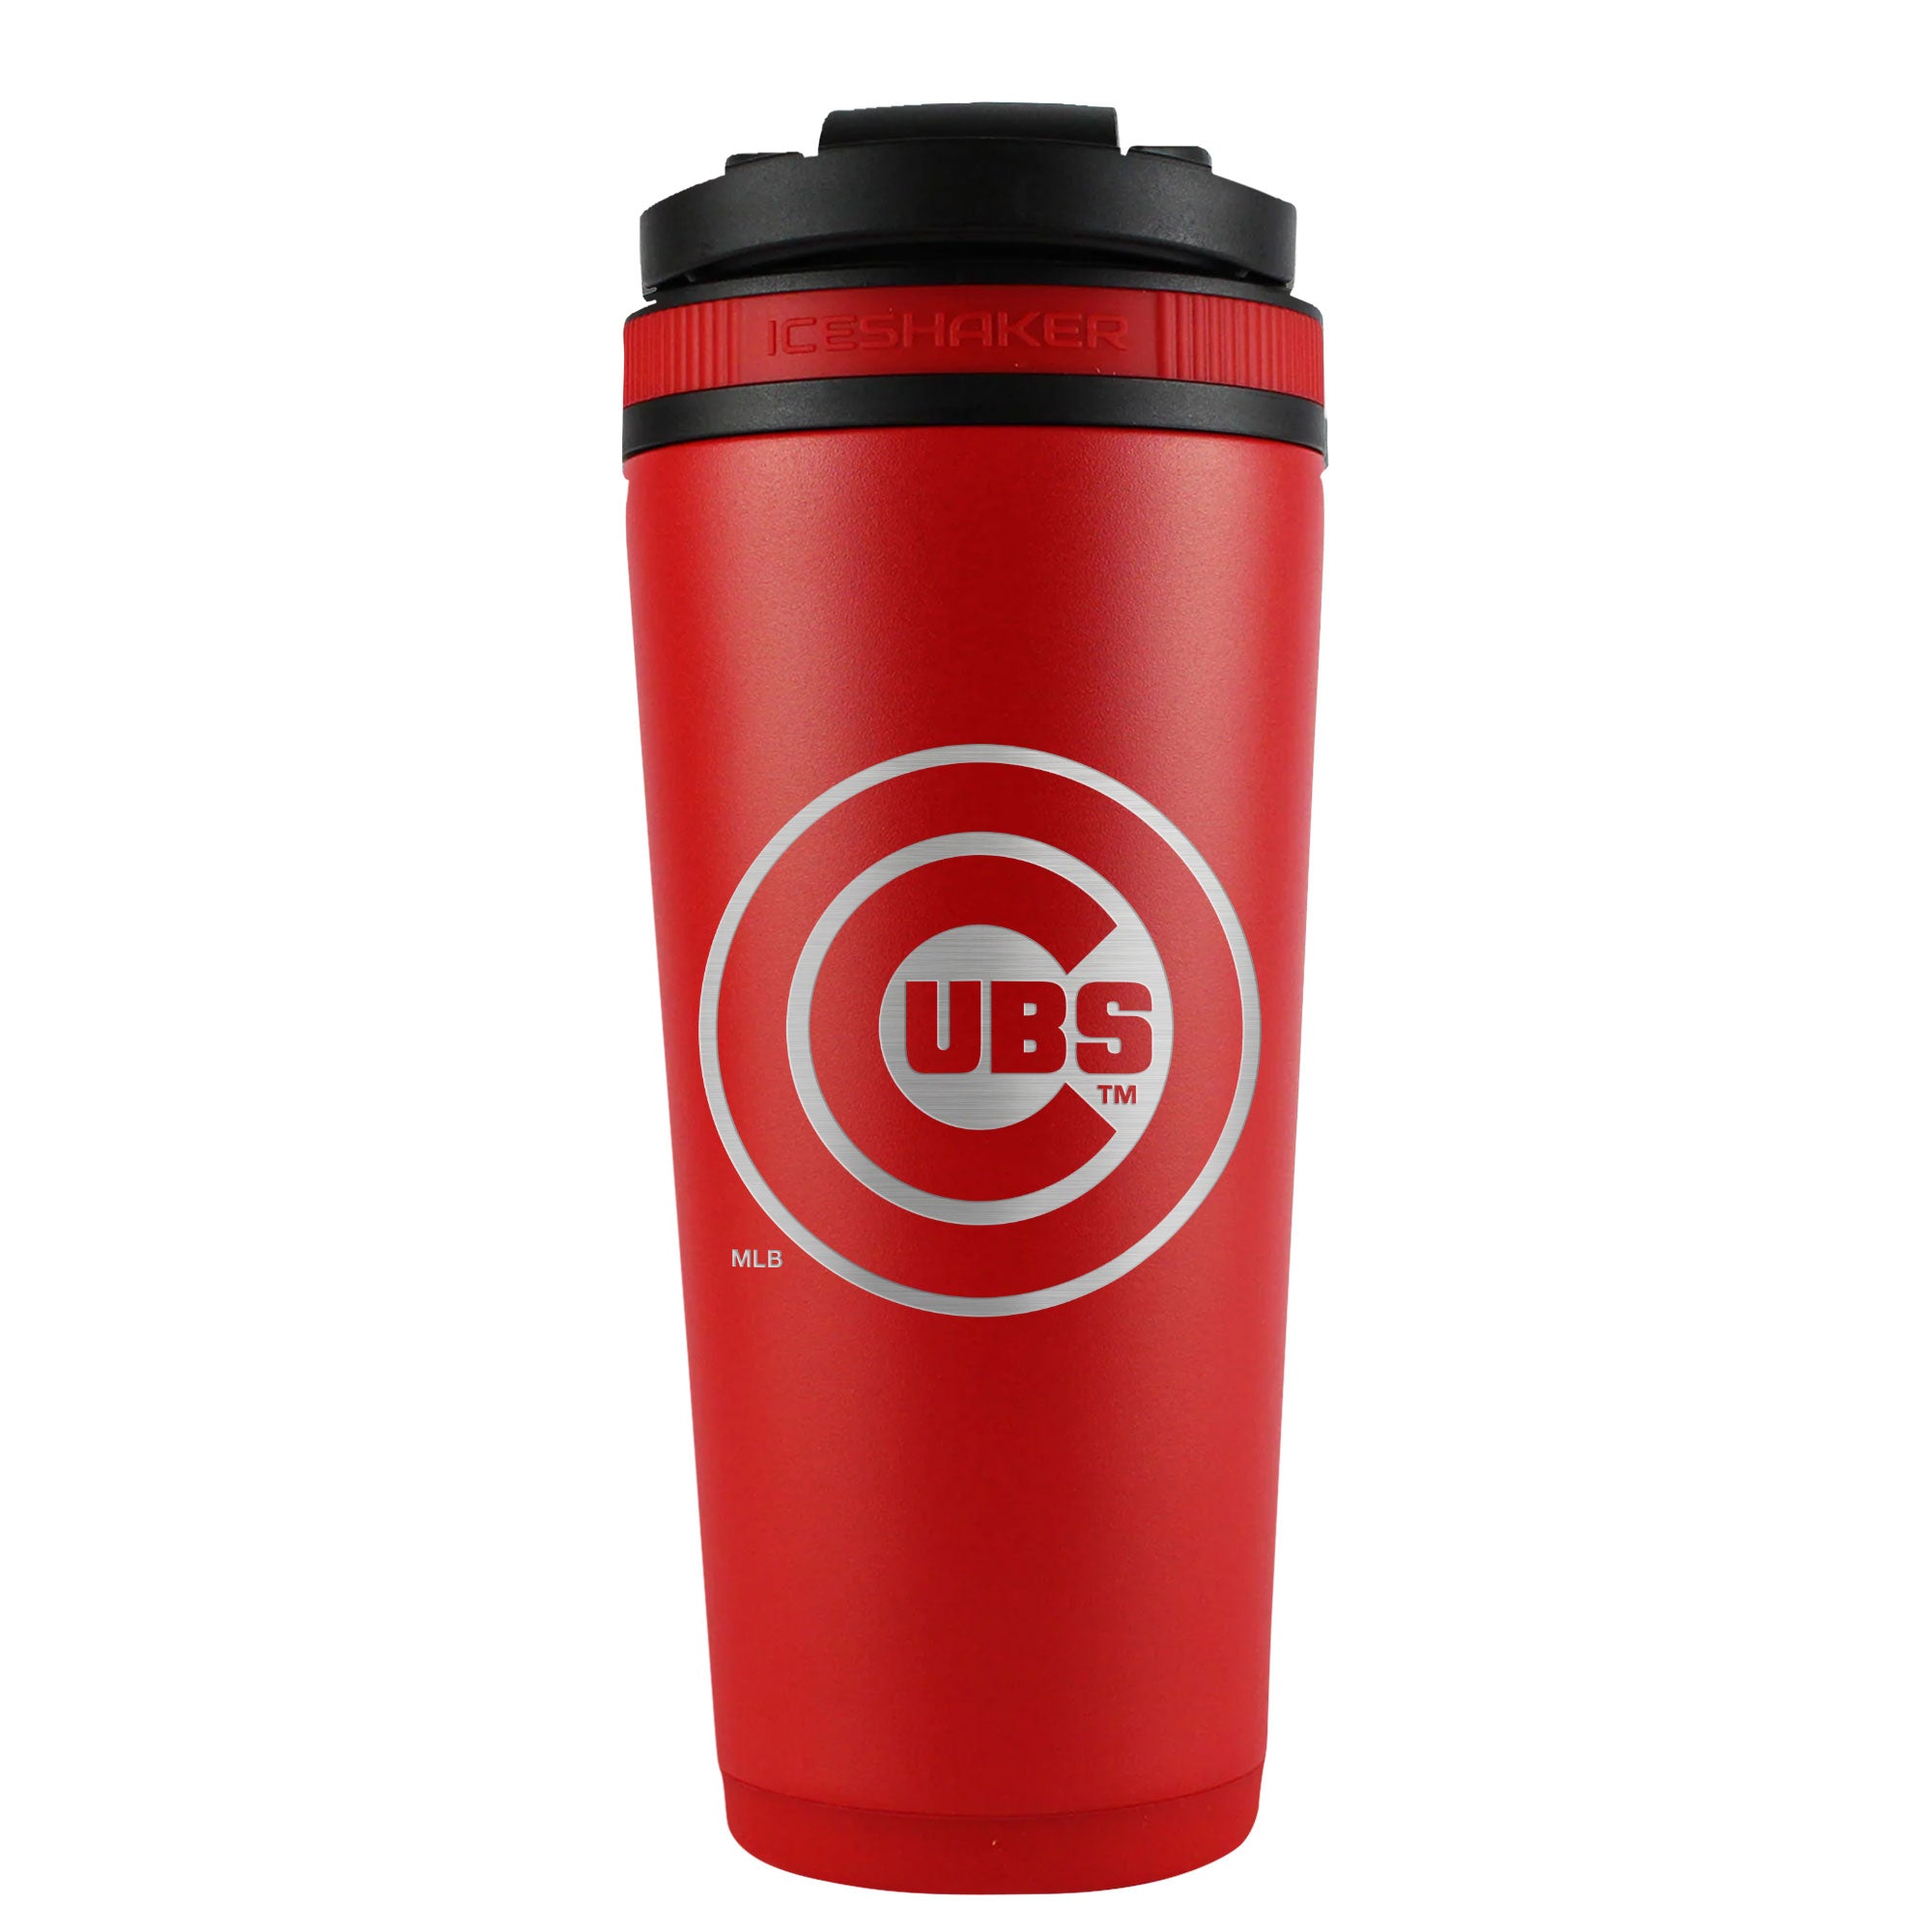 Officially Licensed Chicago Cubs 26oz Ice Shaker - Red